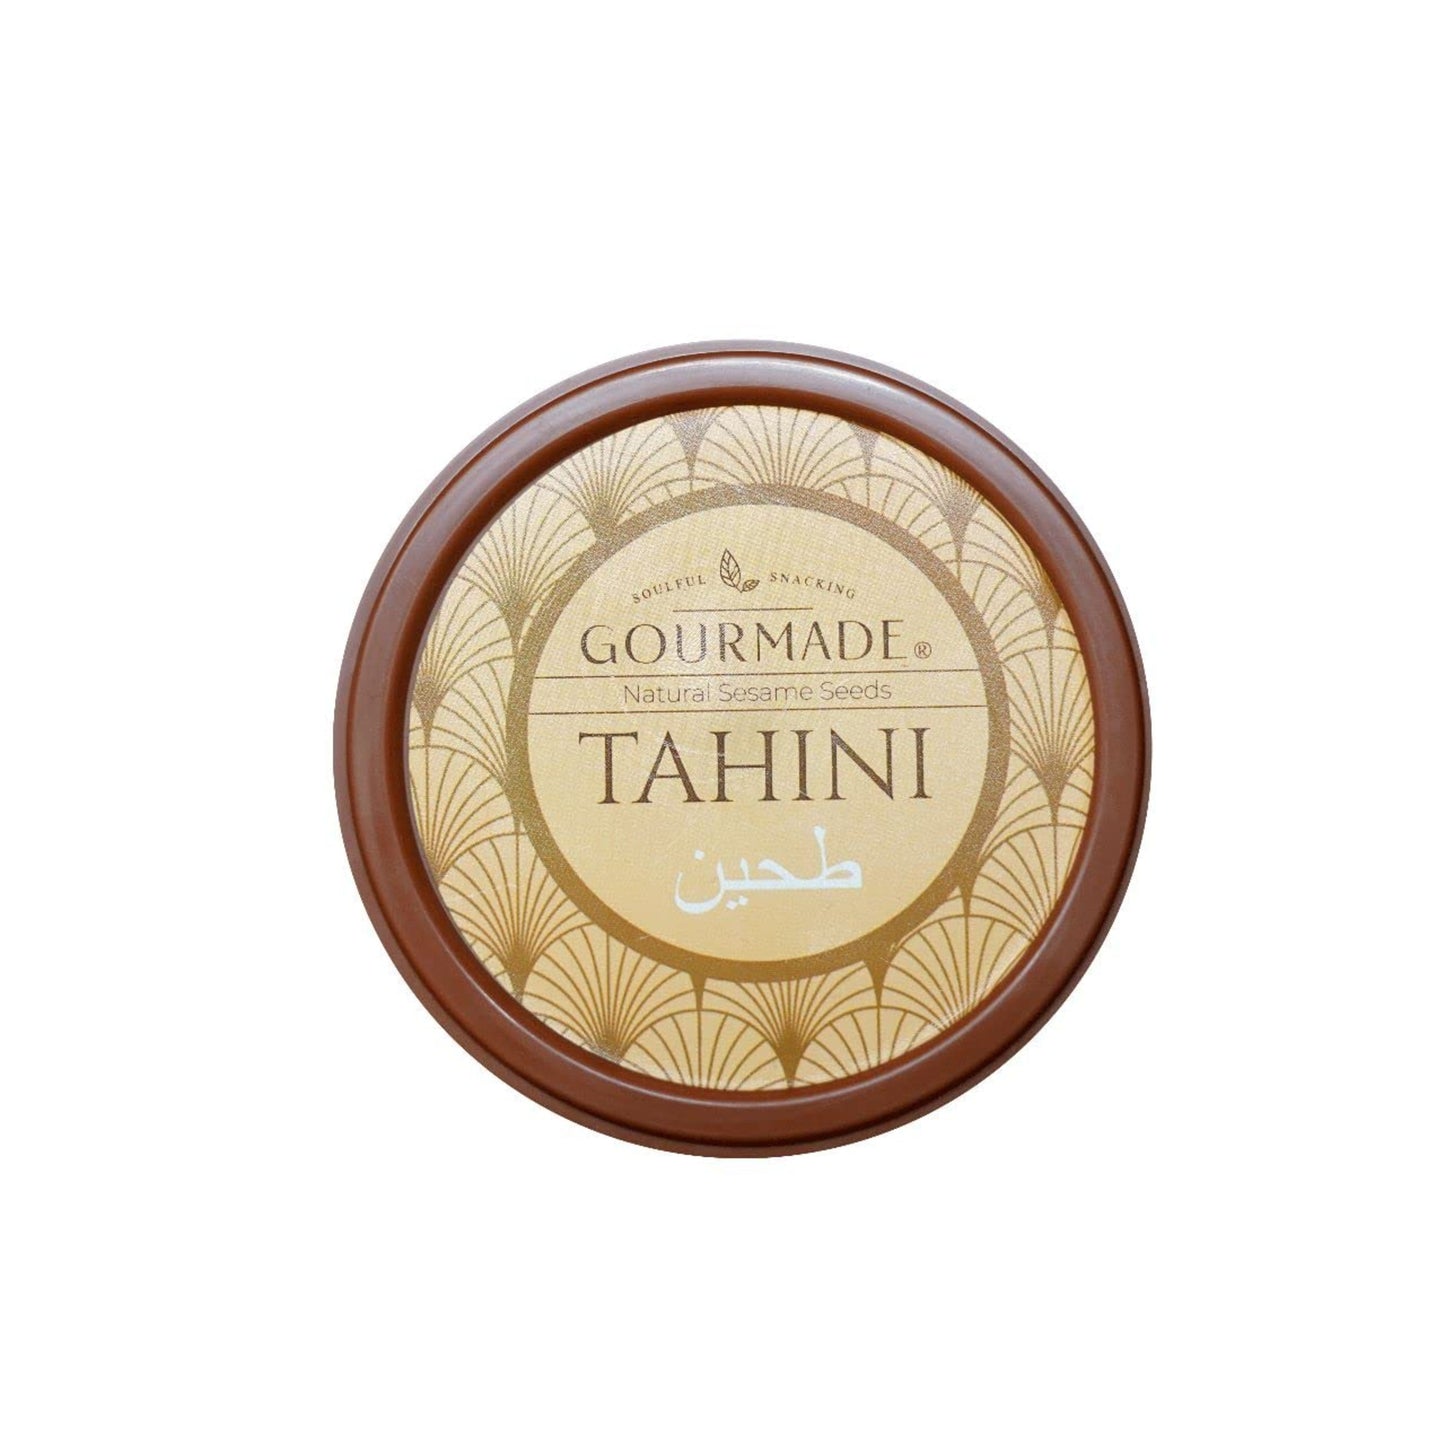 Tahini Paste for Cooking made with Natural Sesame Seeds Hummus